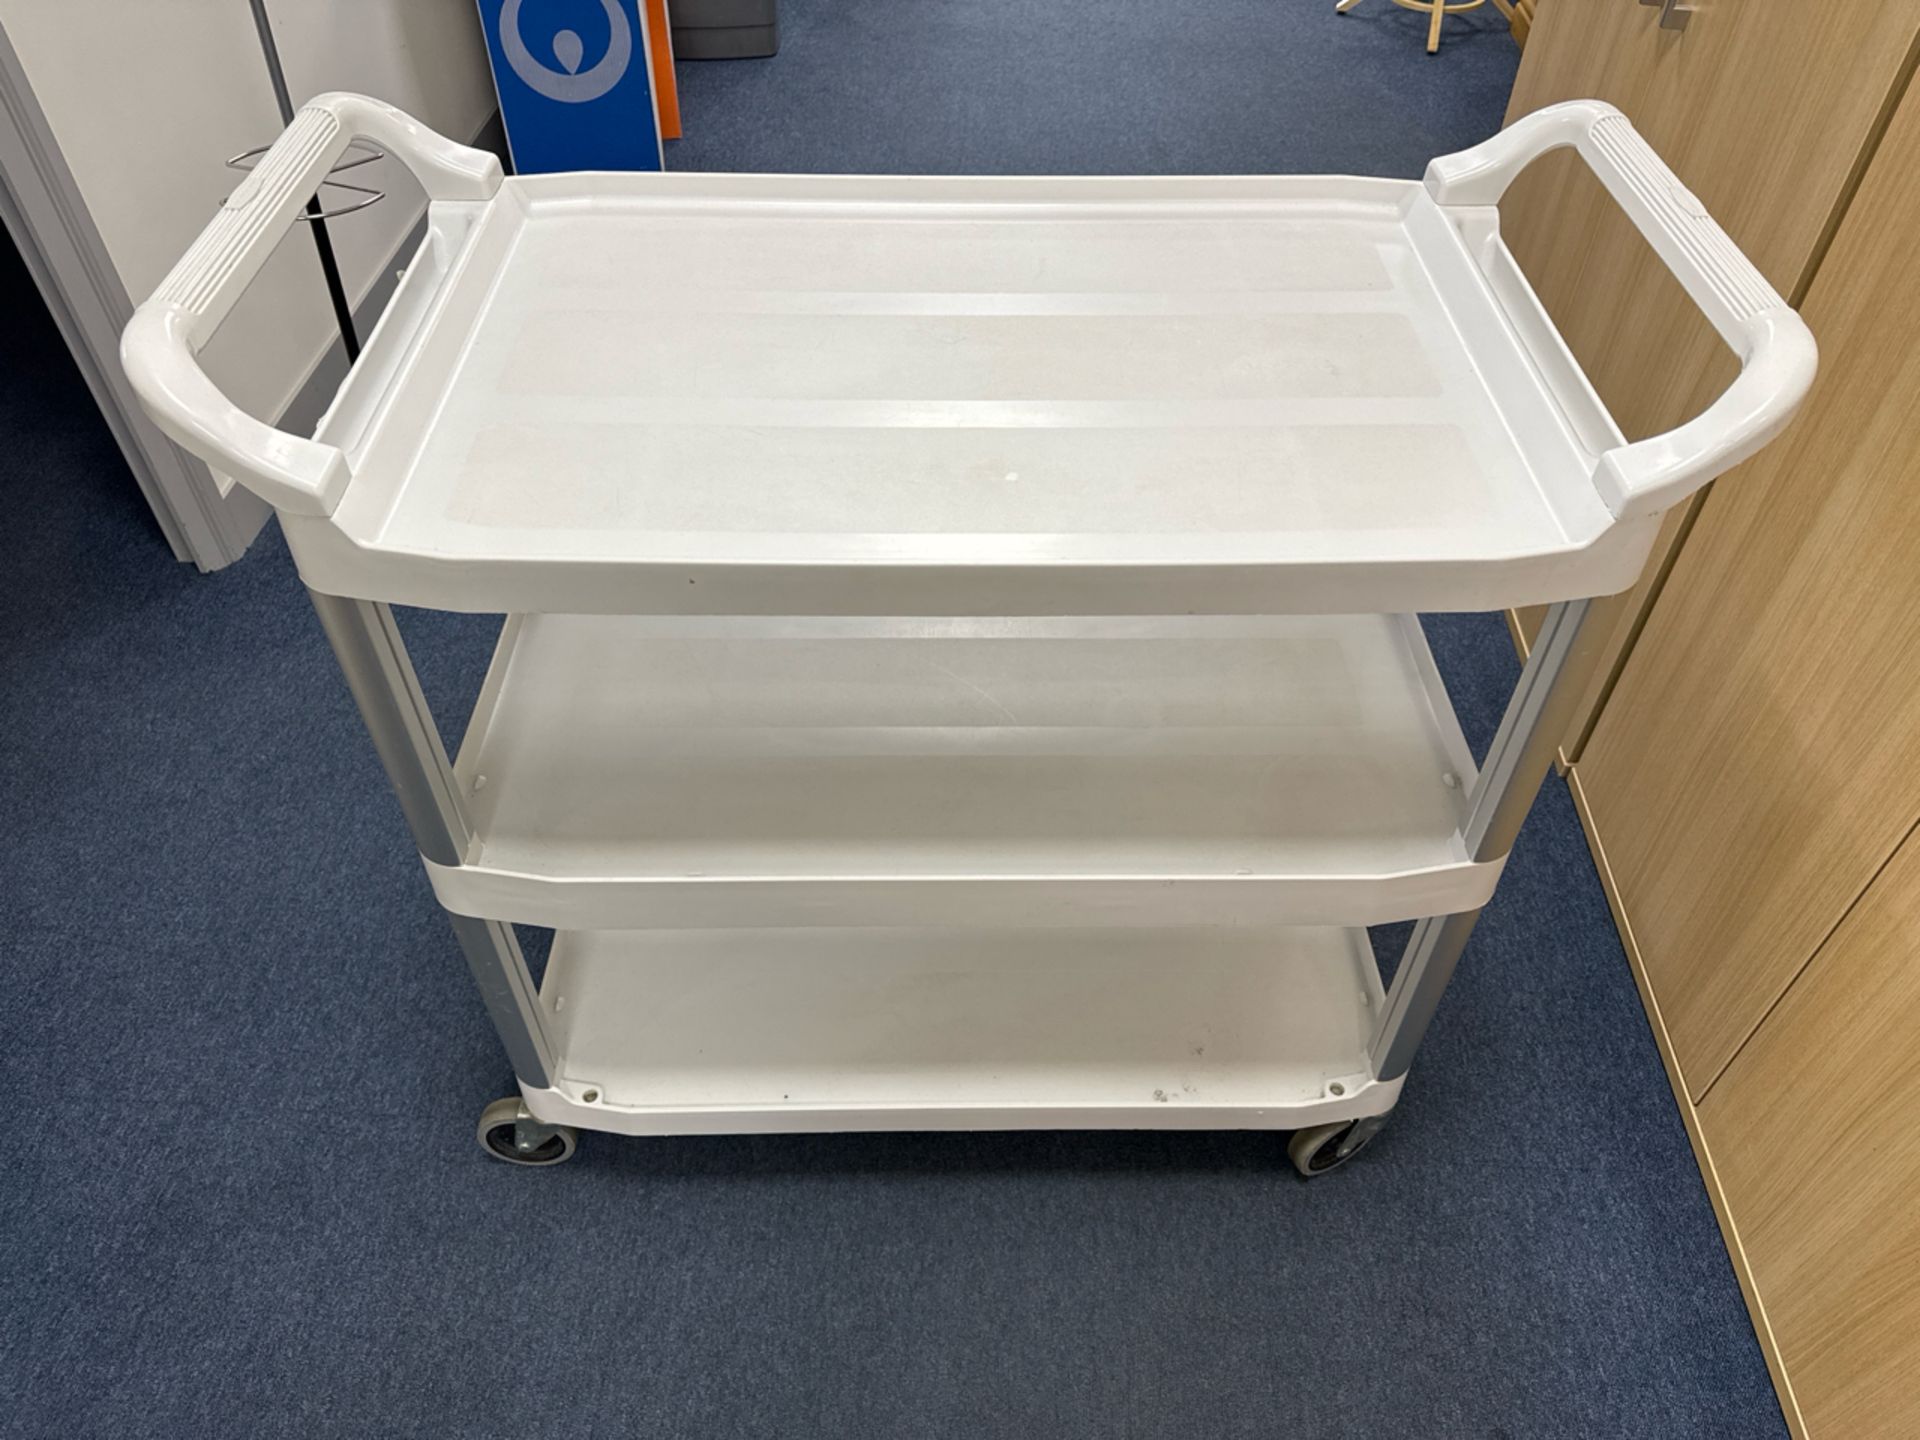 Plastic Rubbermaid Tiered Trolley